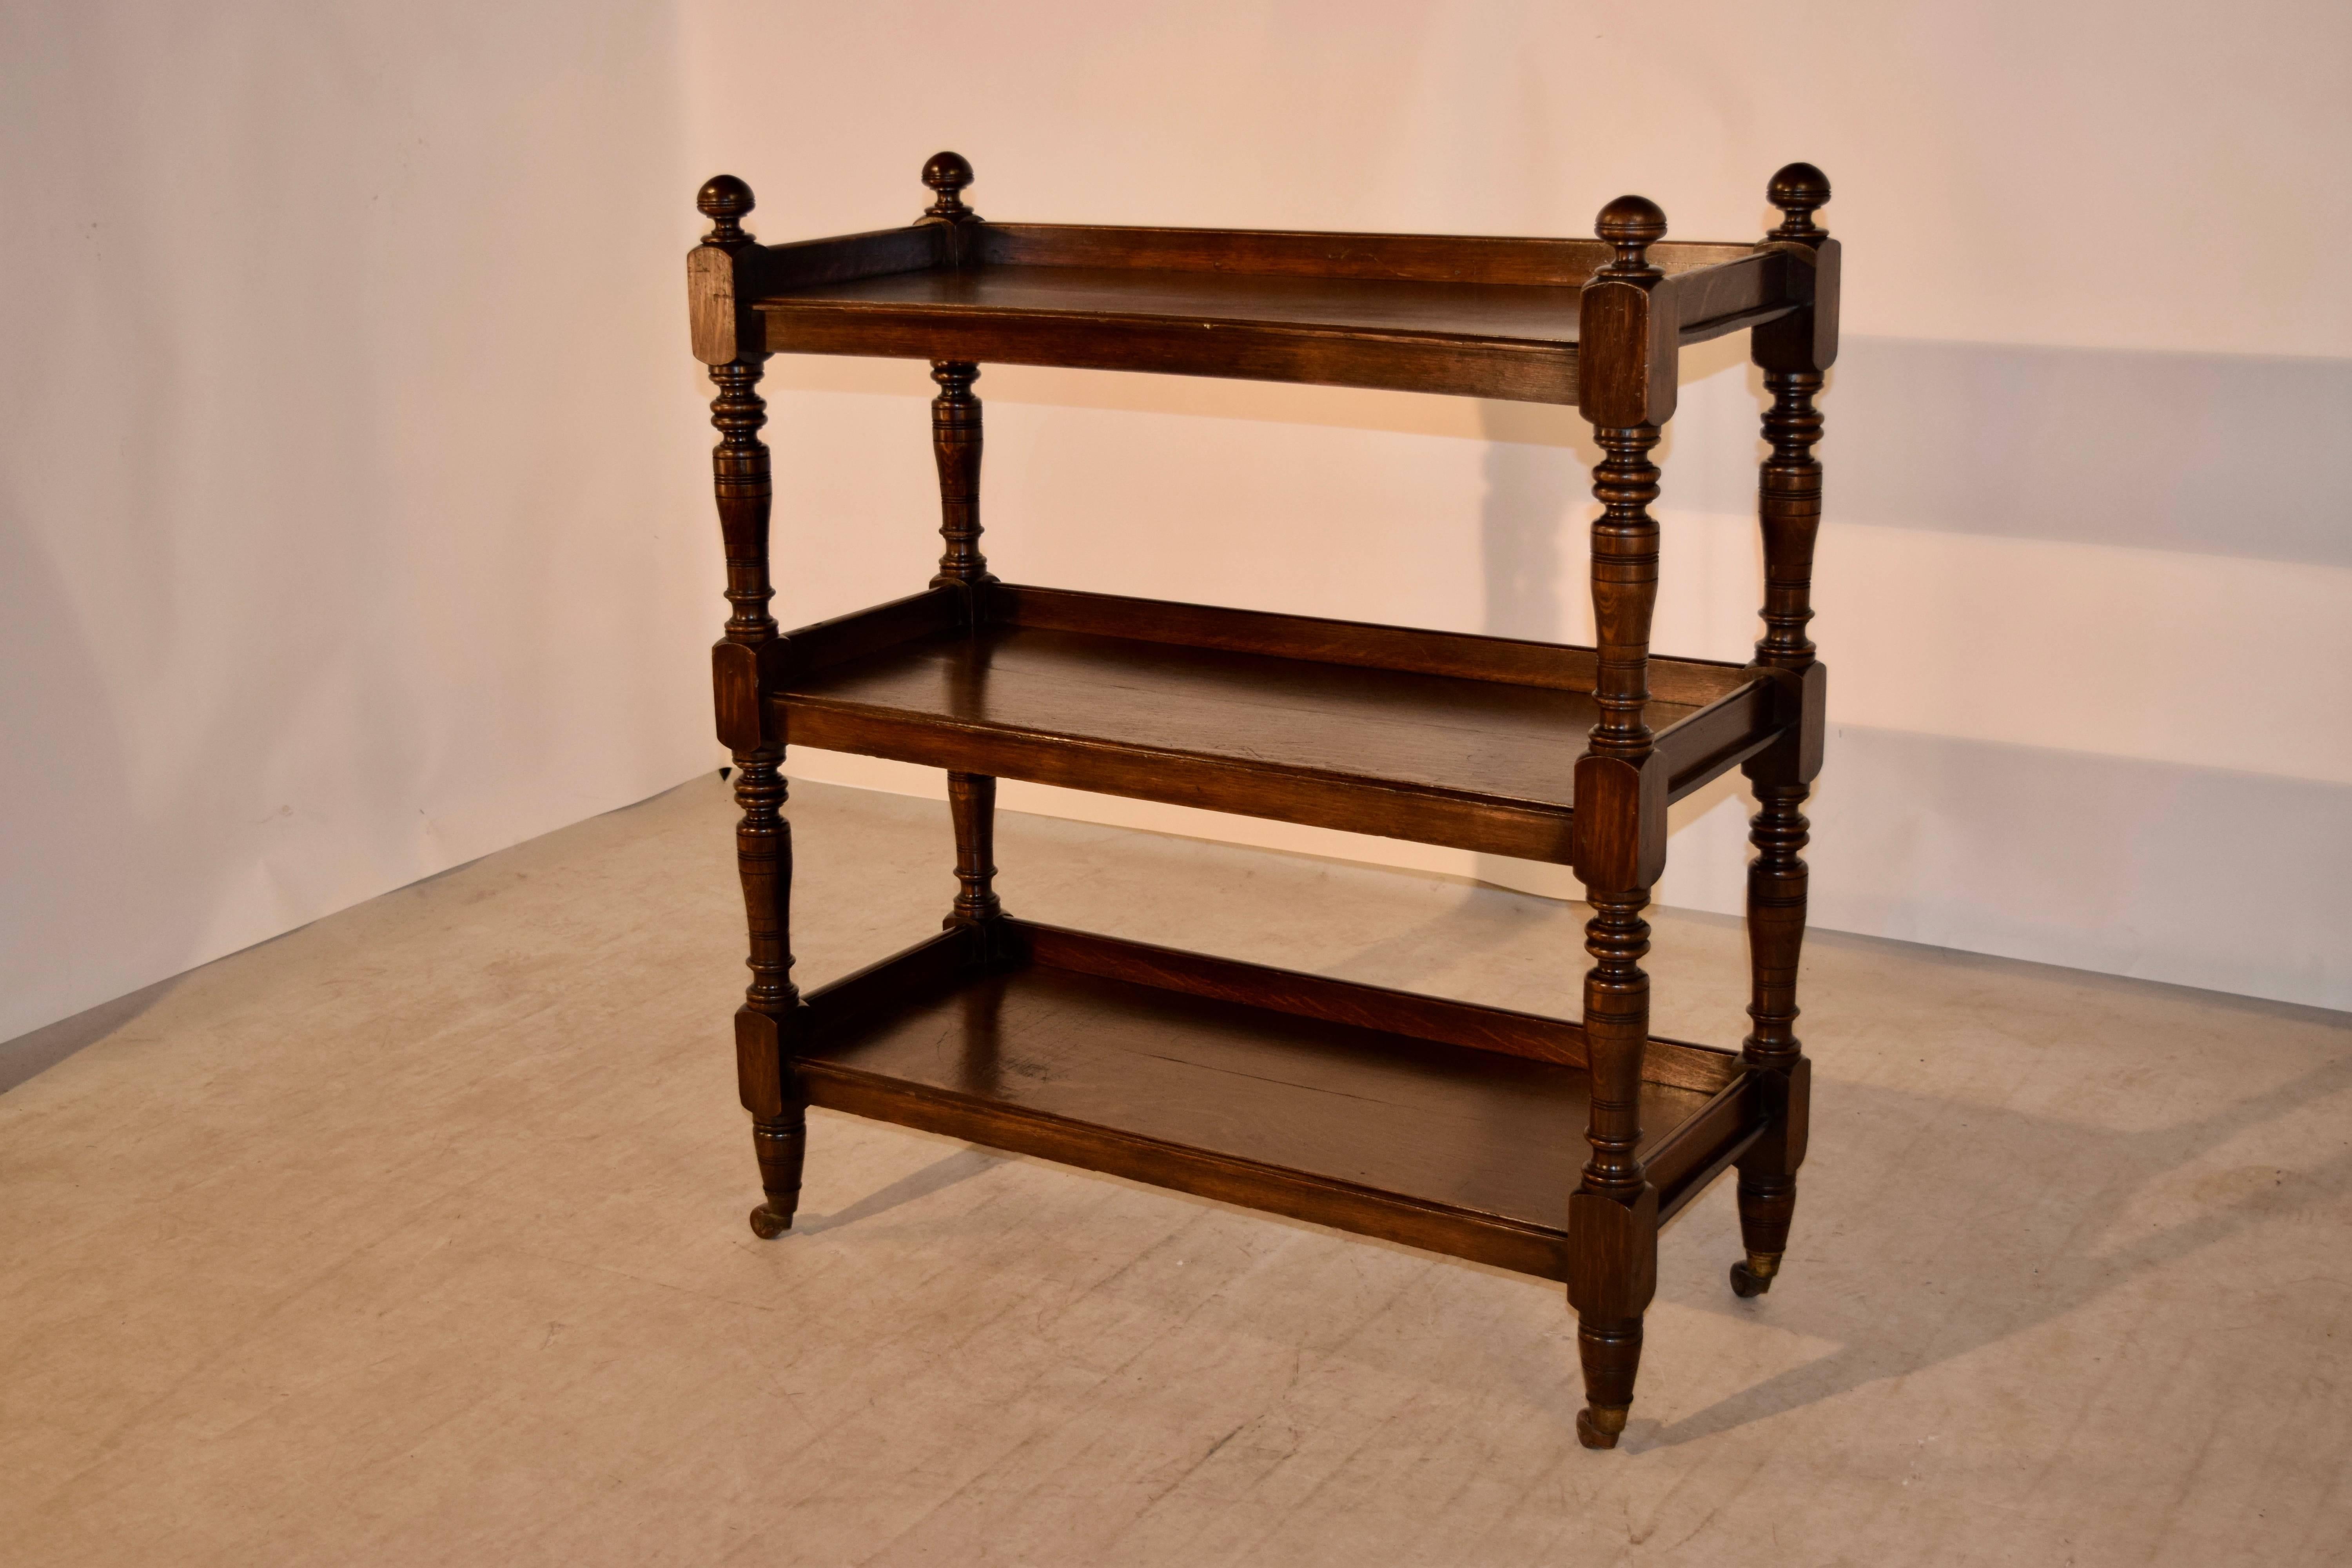 19th Century English oak dessert buffet with three shelves, decorated with hand-turned finials at the top and hand-turned shelf supports. All three shelves are surrounded by galleries, and the piece is resting on original casters.